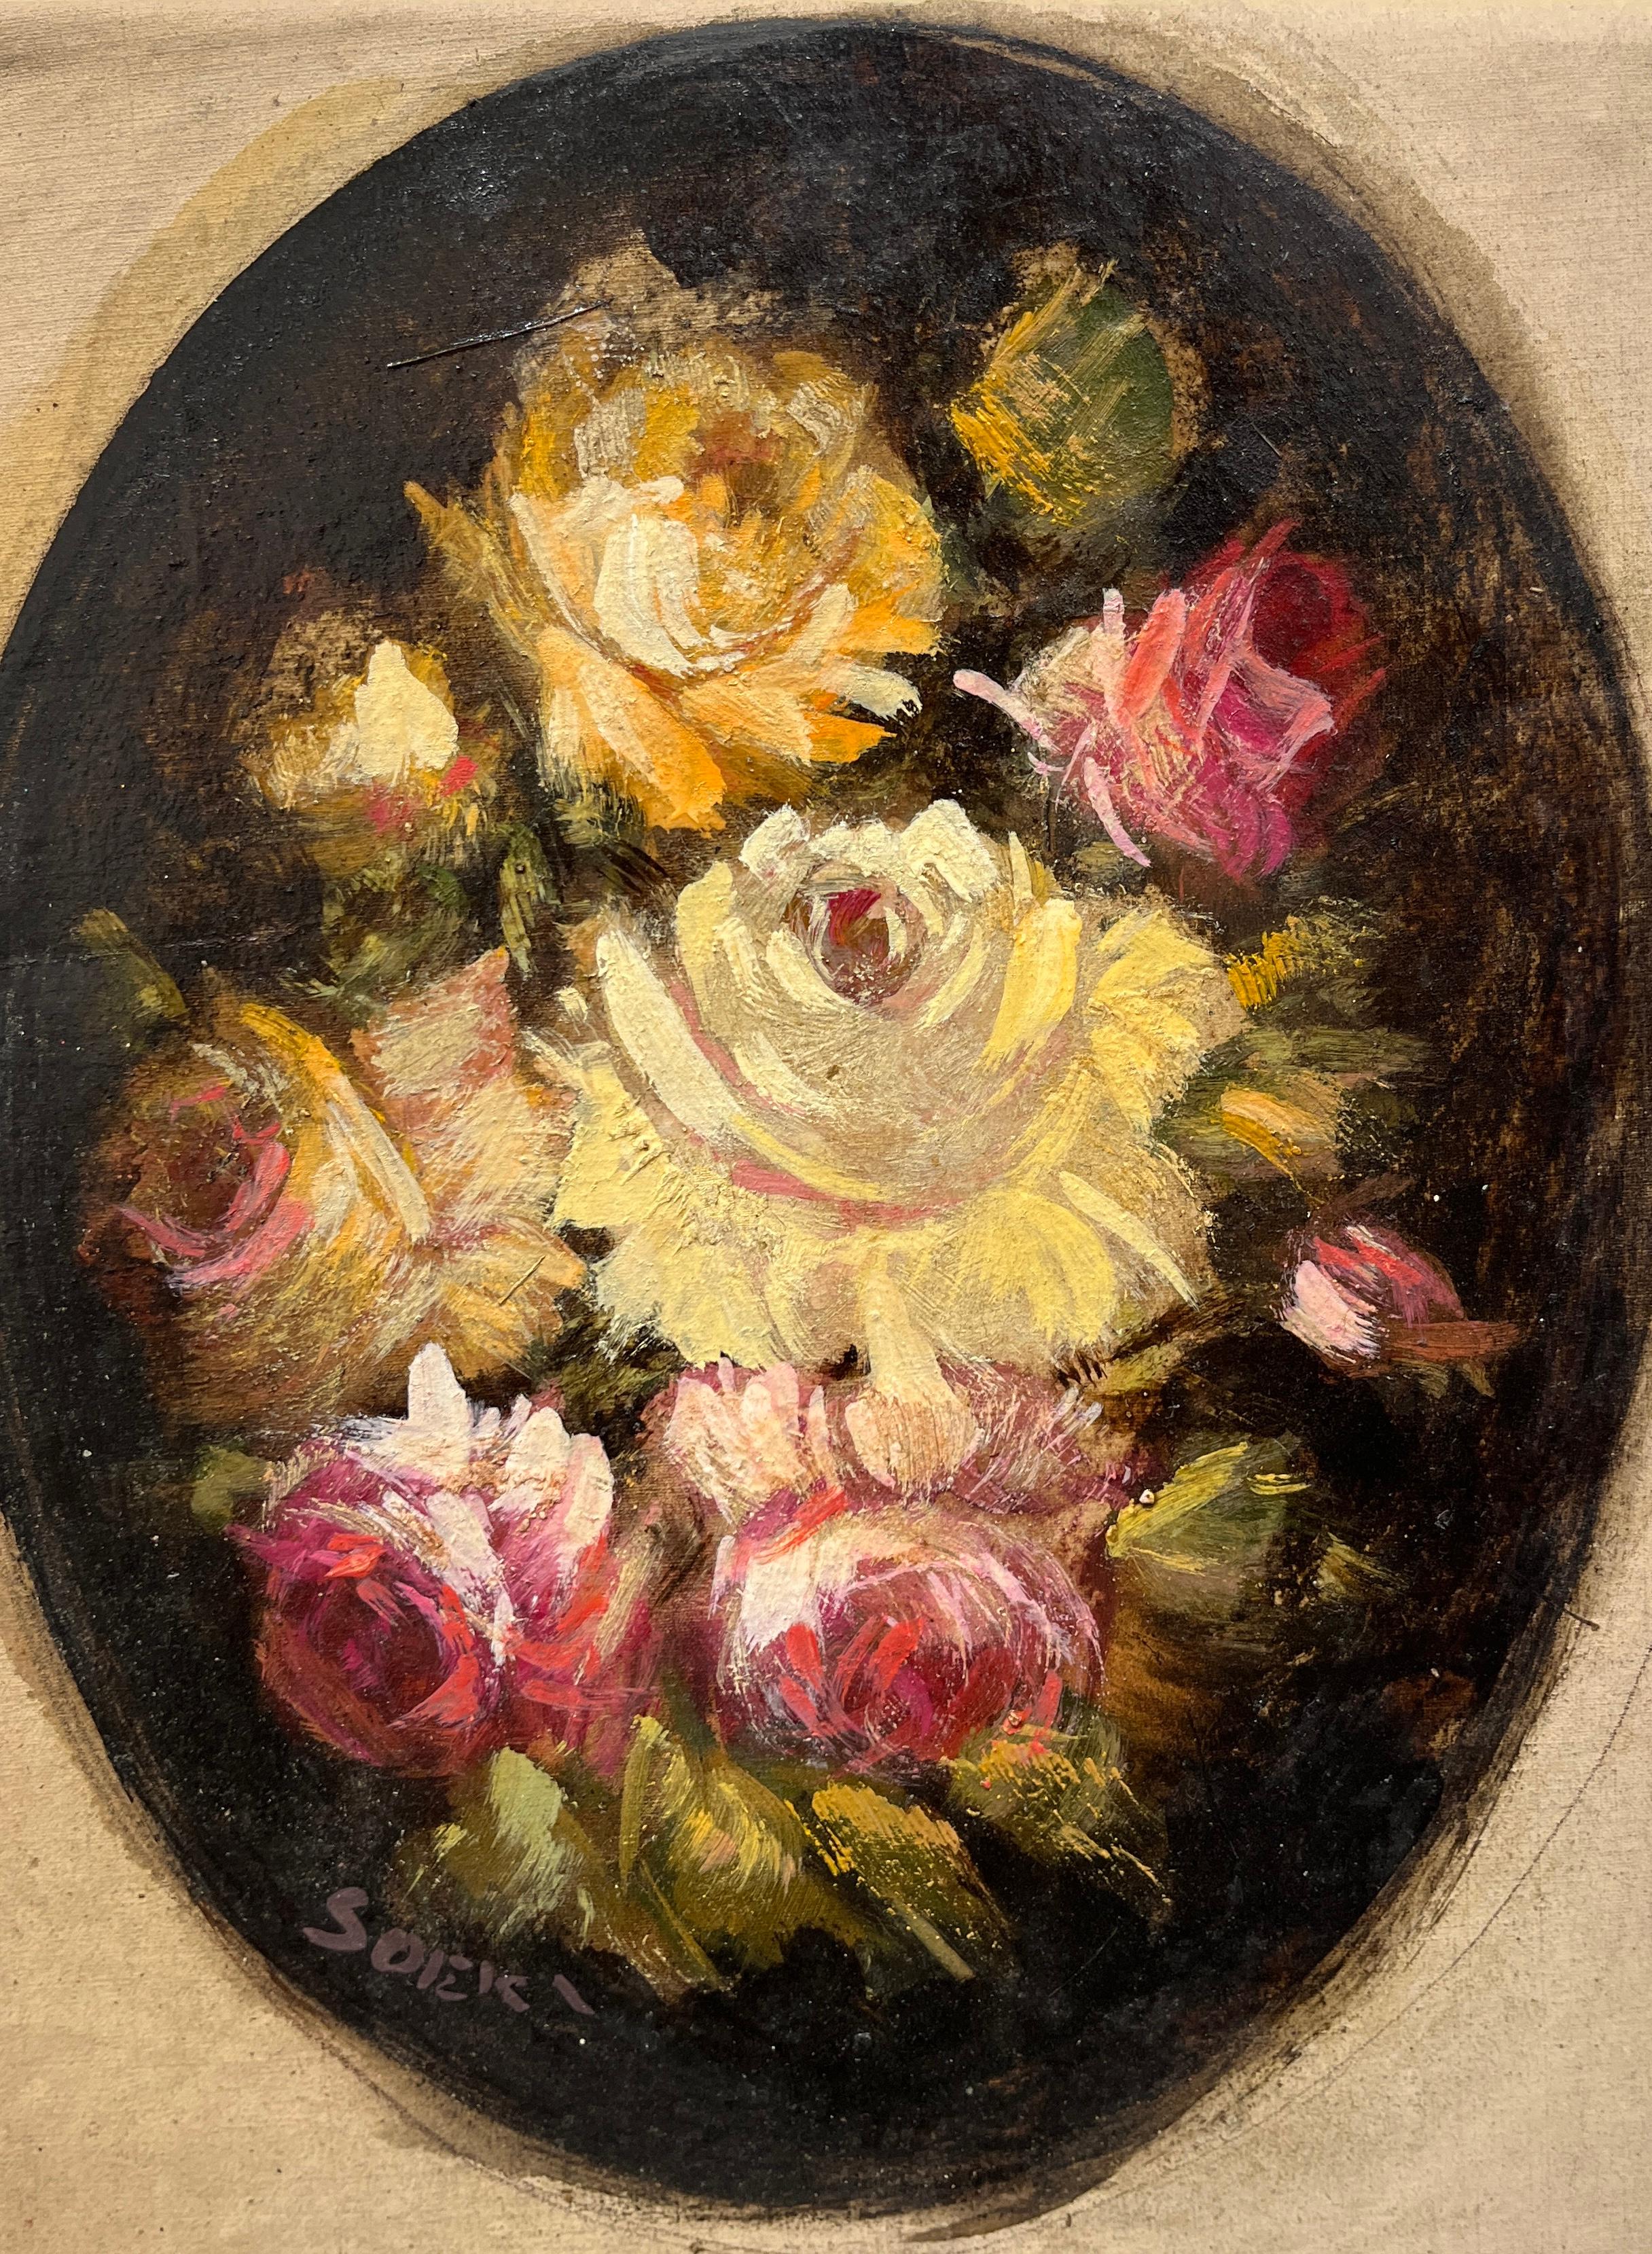 In this stunning and intimate artwork, a very small bouquet of roses comes together in the center of a canvas. The delicate roses, with their exquisite petals and gentle colors, carry a profound presence, as if they hold the secrets of the canvas